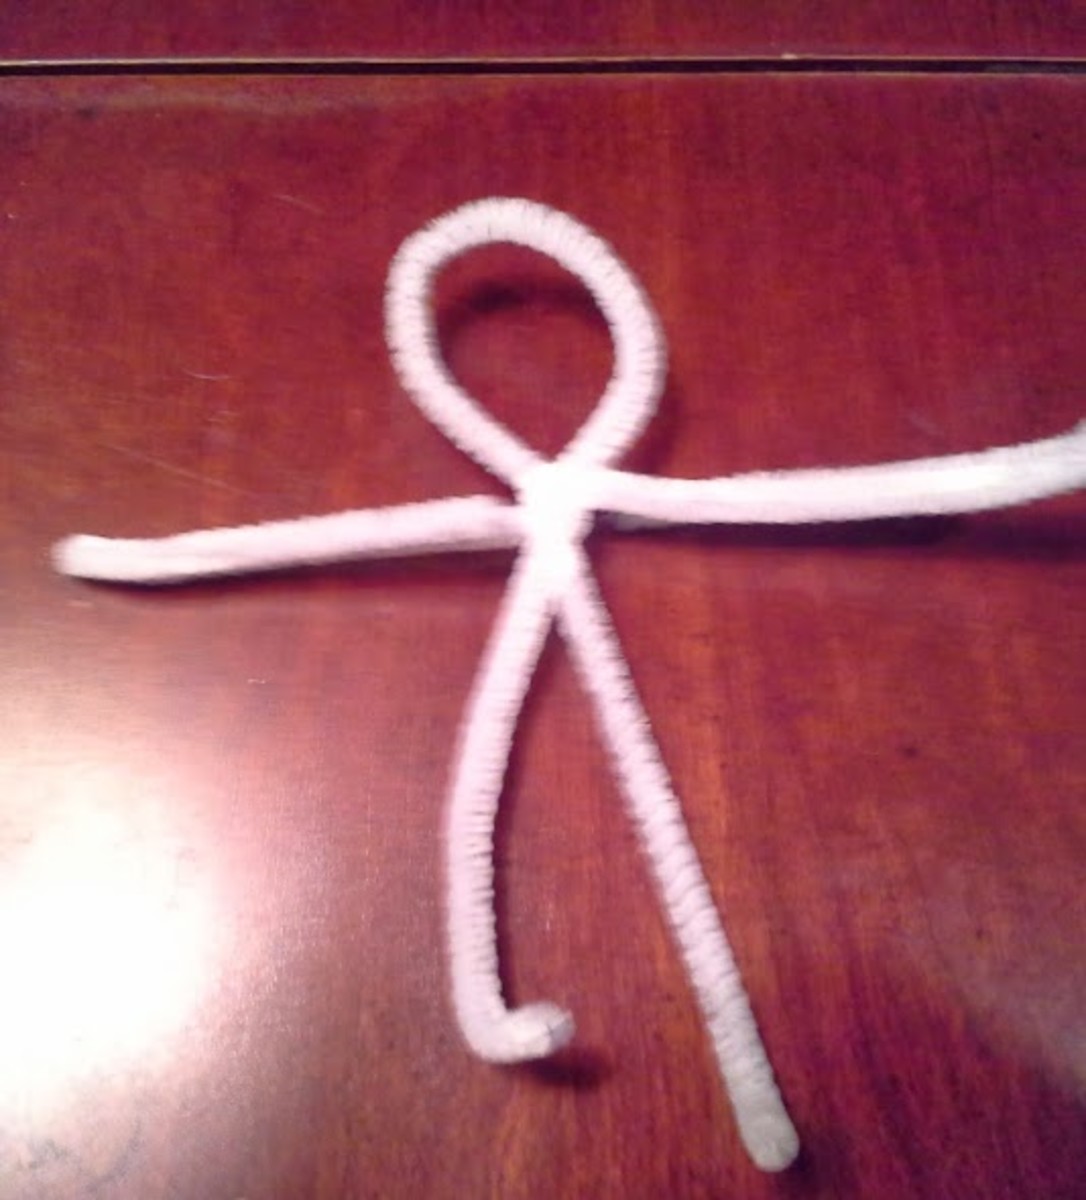 Twist the other pipe cleaner at the very bottom of the loop to make the arms.  They need to be cropped using a wire cutter to the desired length.  Do not forget to curl up the ends to avoid sharp edges.